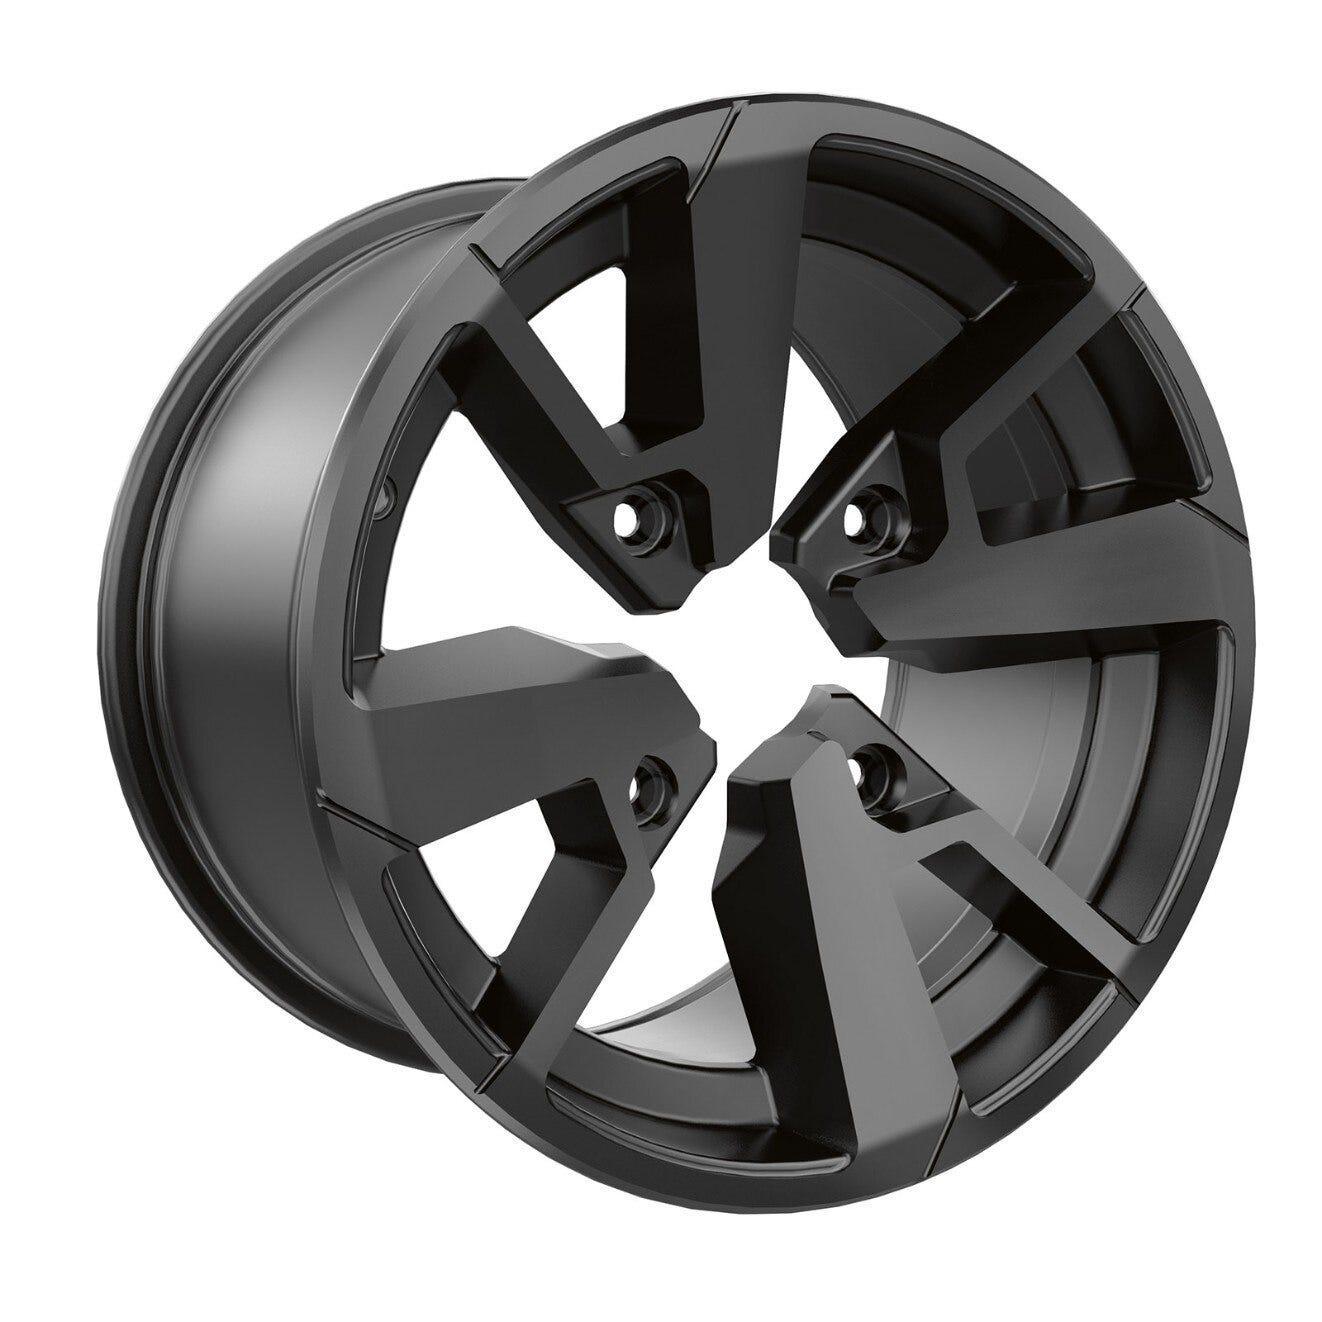 14" Rim - Rear / Black and machined - Factory Recreation